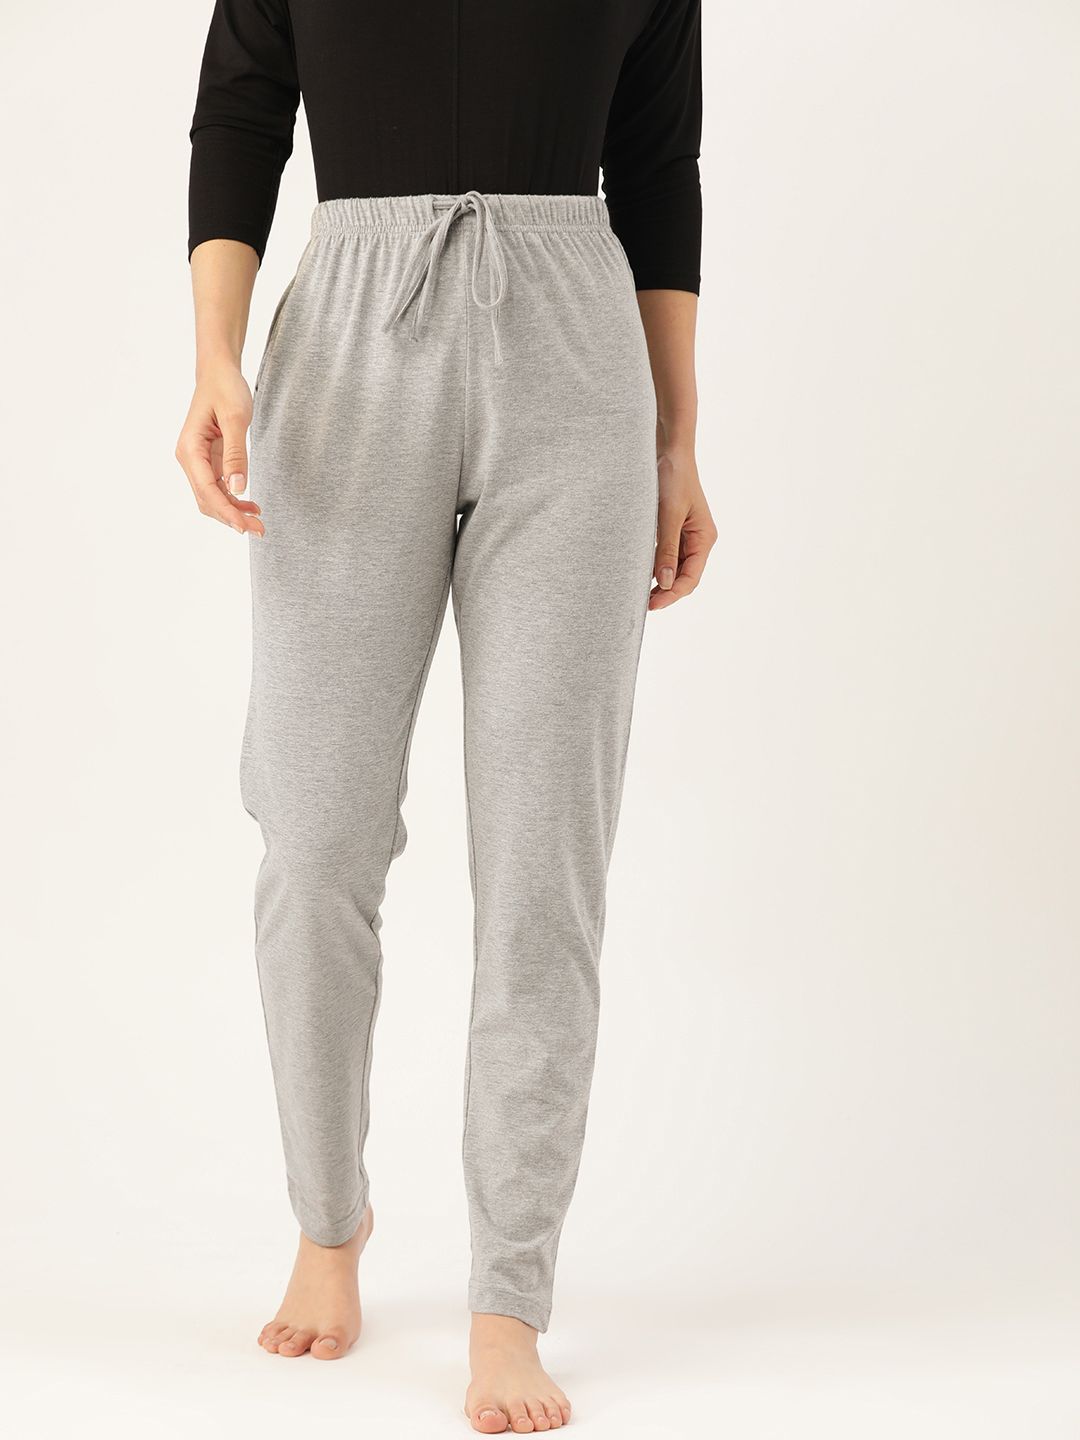 ETC Women Grey Melange Pure Cotton Solid Lounge Pants Price in India